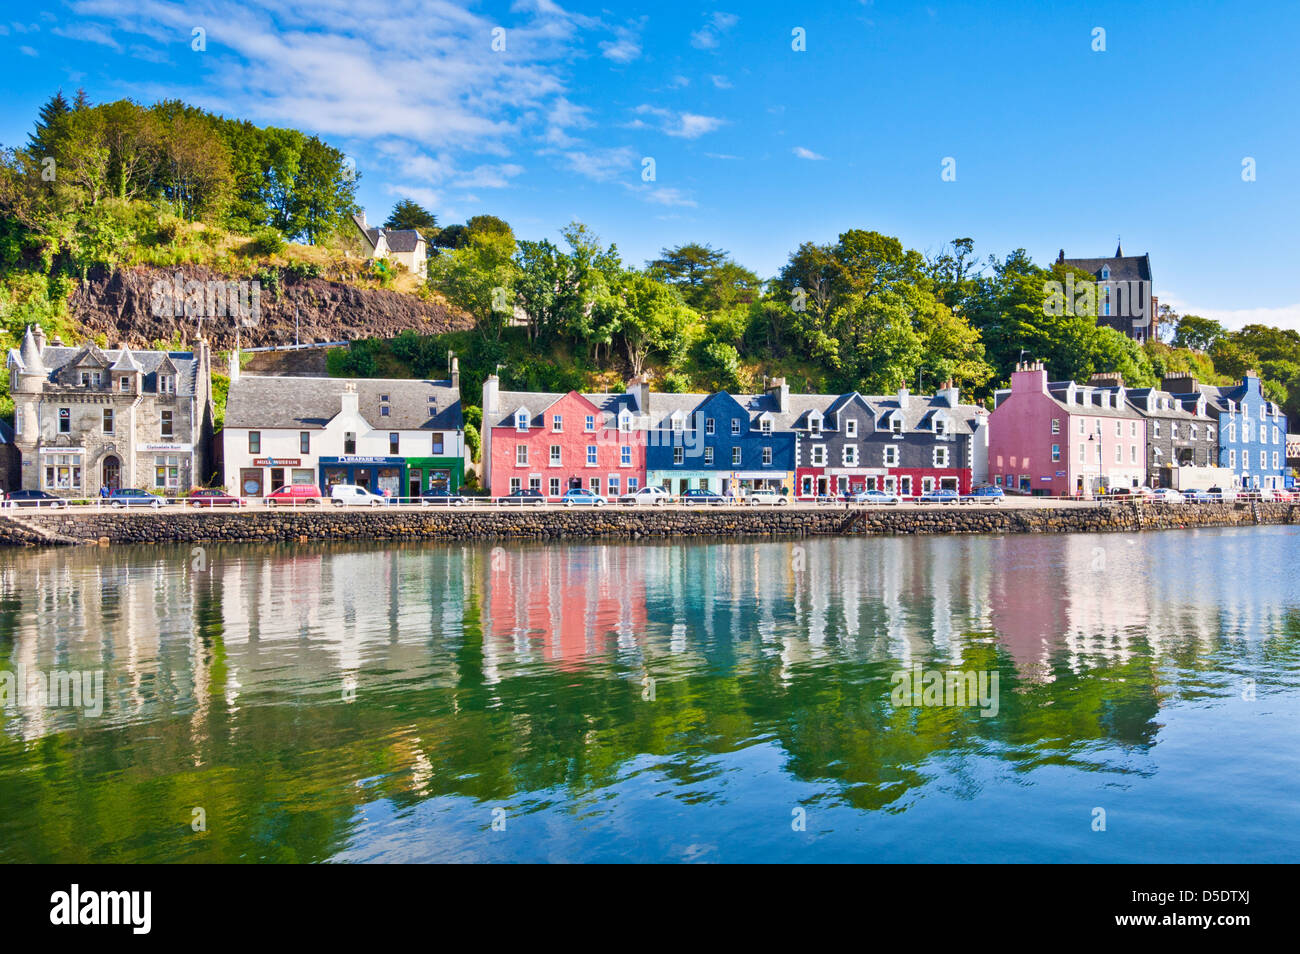 Isle of Mull Tobermory harbour at high tide with small fishing boats Isle of Mull Inner Hebrides Argyll and Bute Scotland UK GB EU Europe Stock Photo